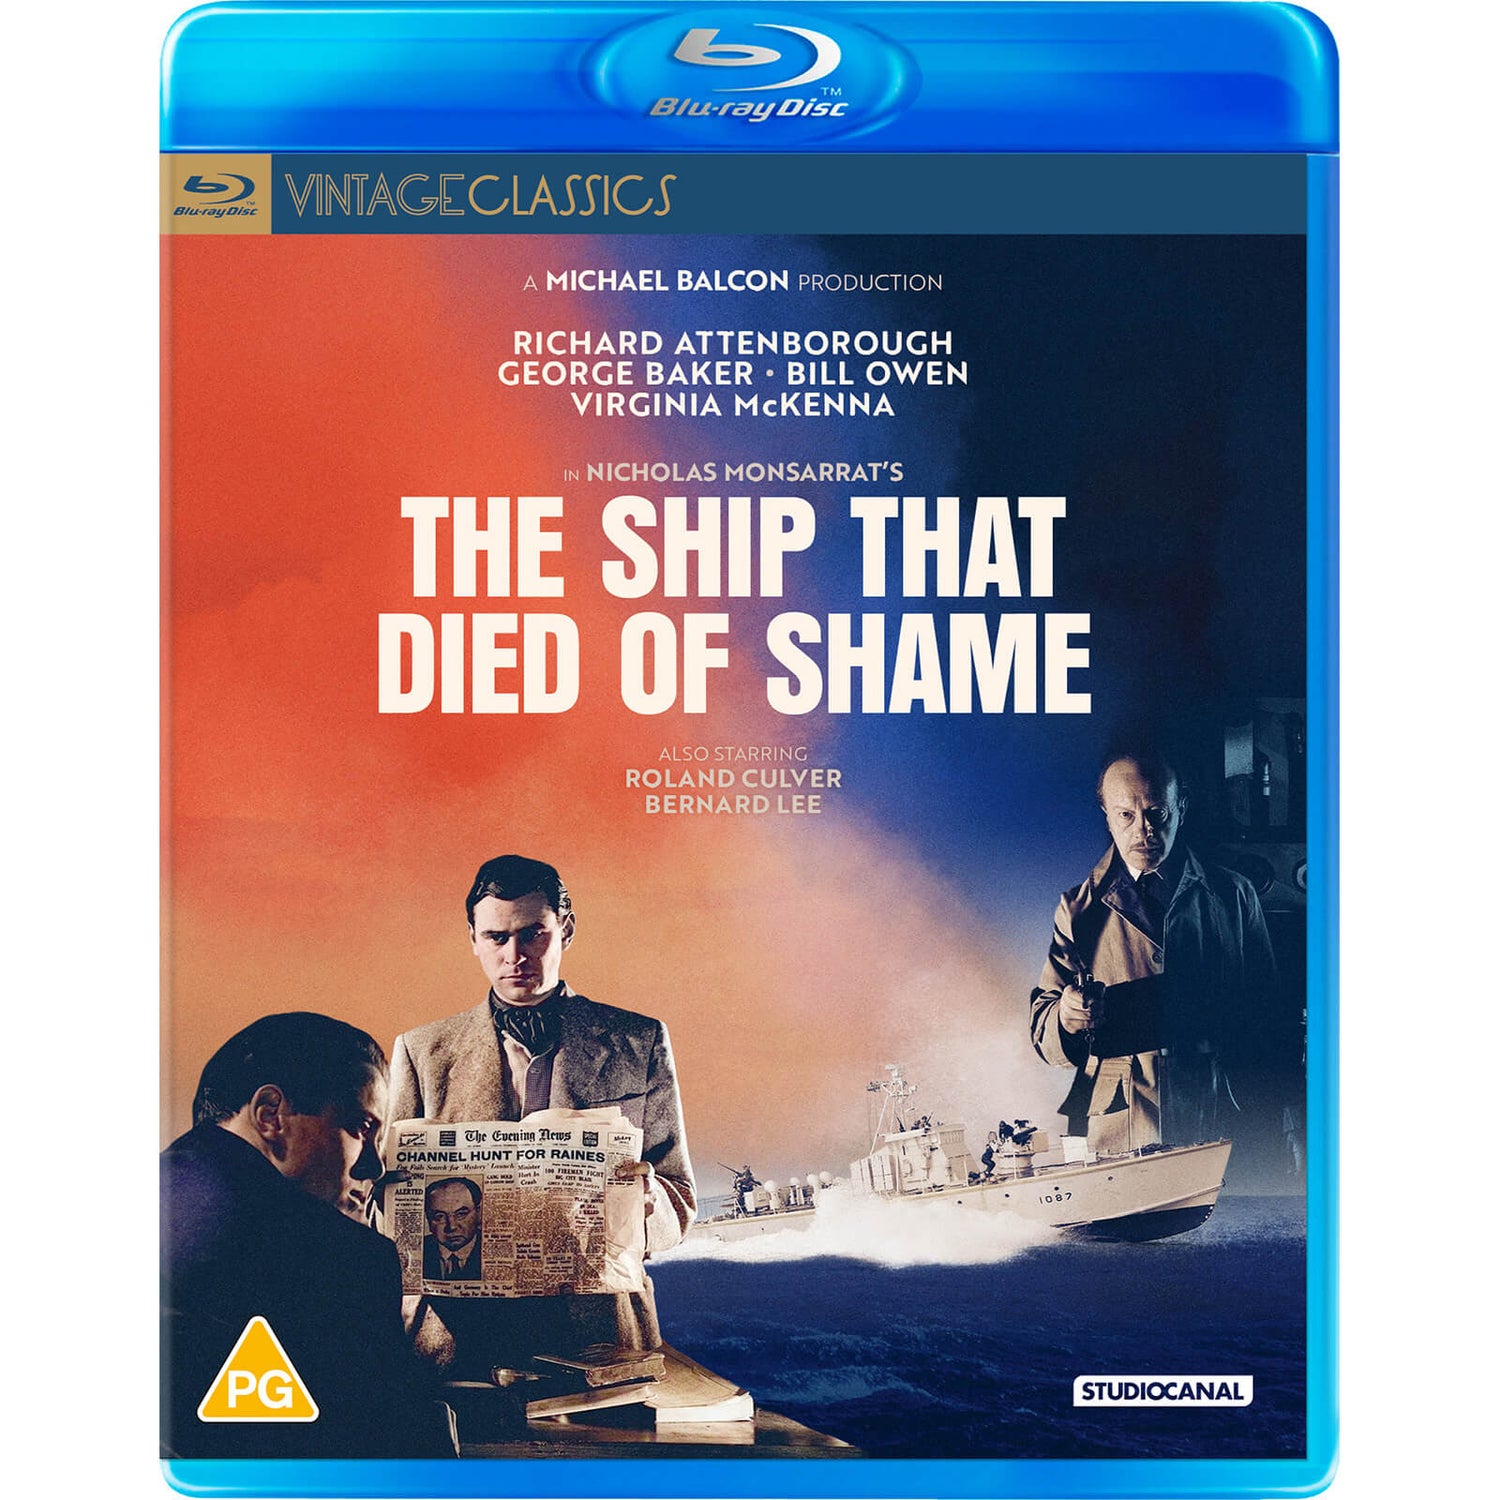 The Ship That Died of Shame (Vintage Classics)